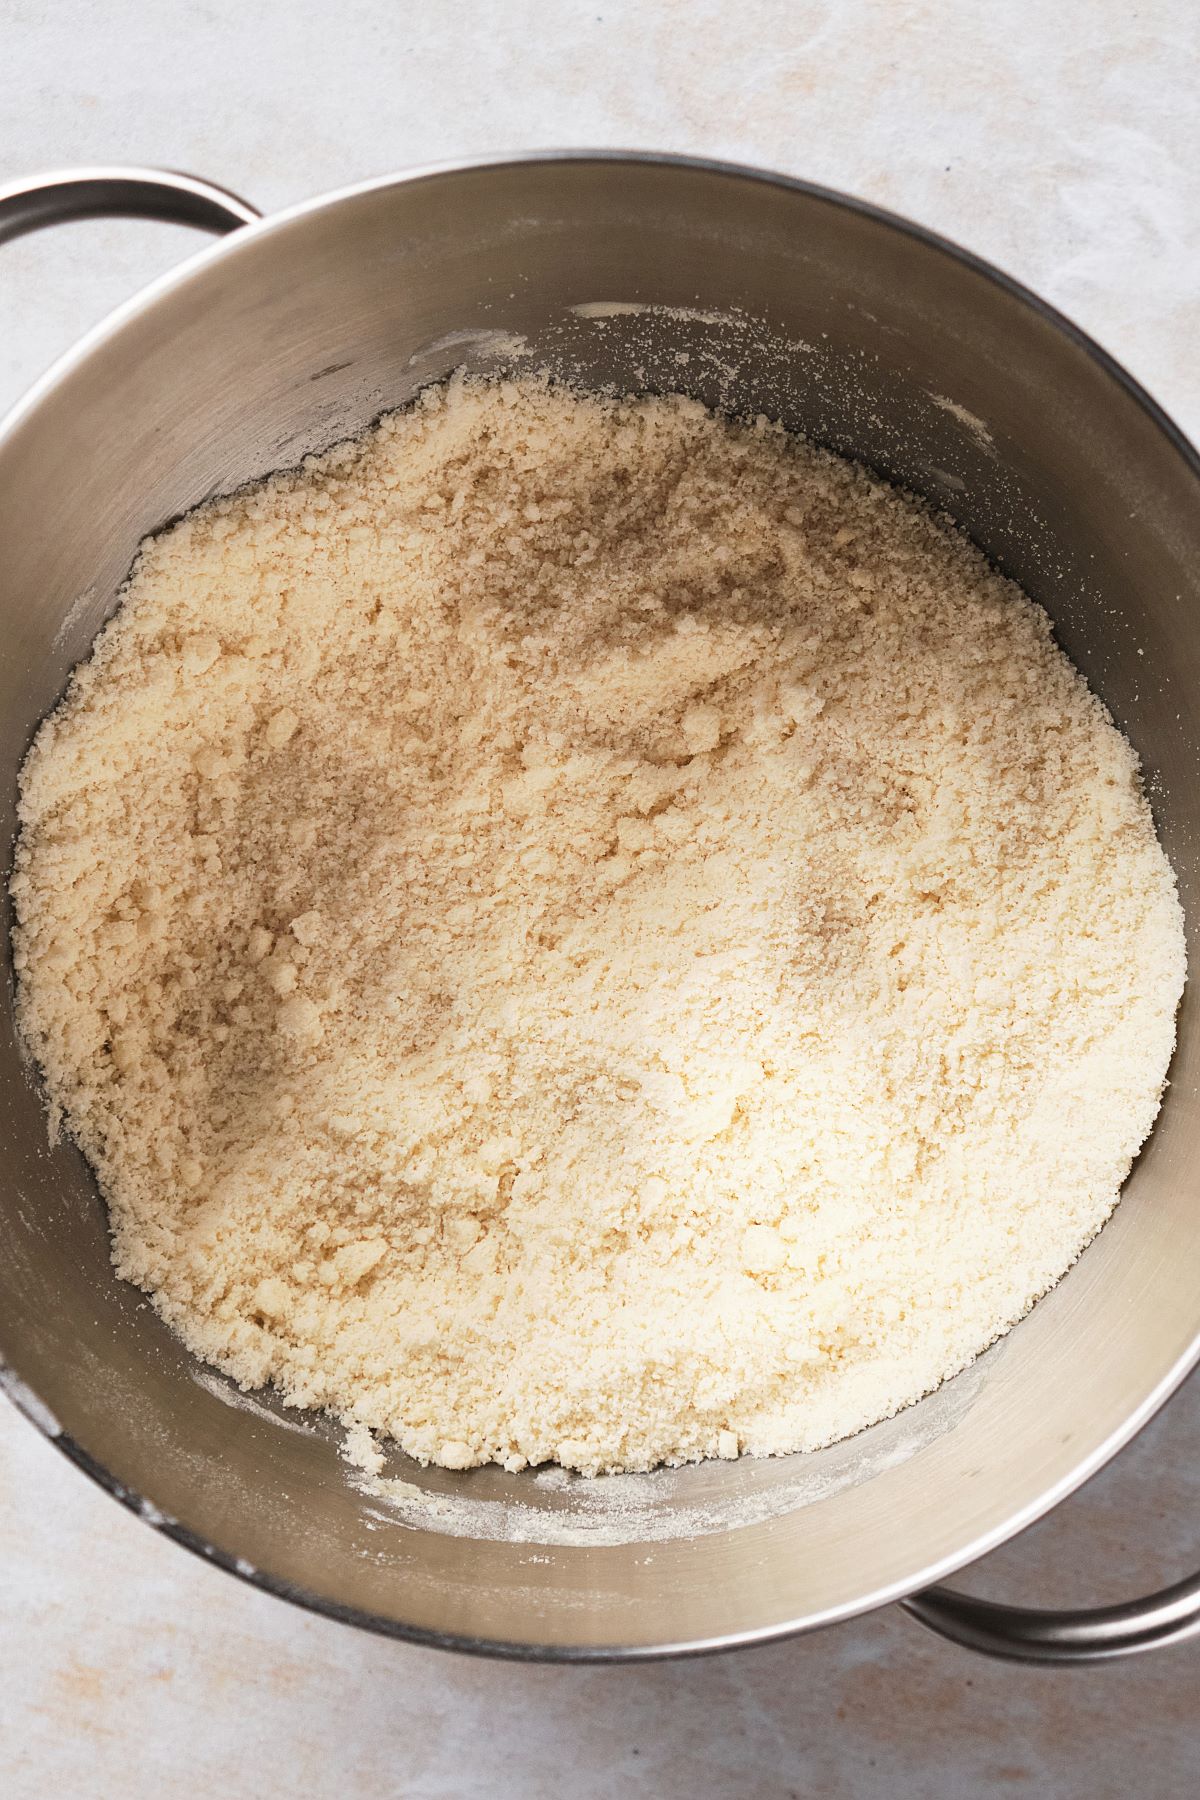 The sandy texture of the reverse creaming method when making the coocnut cake batter.